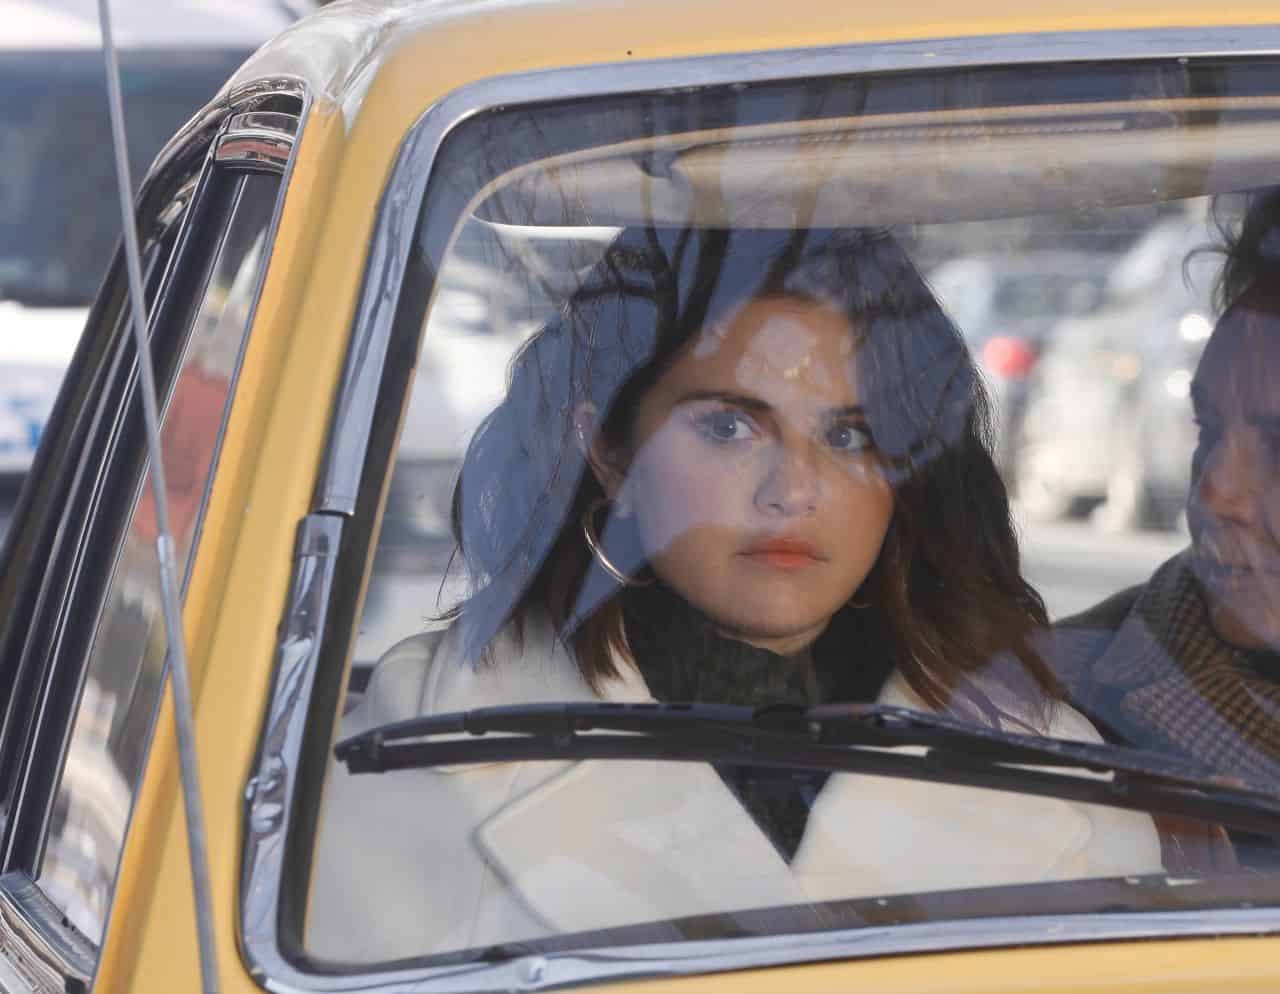 Selena Gomez Wore a White Coat During the Amusing Scene in the Car in OMITB